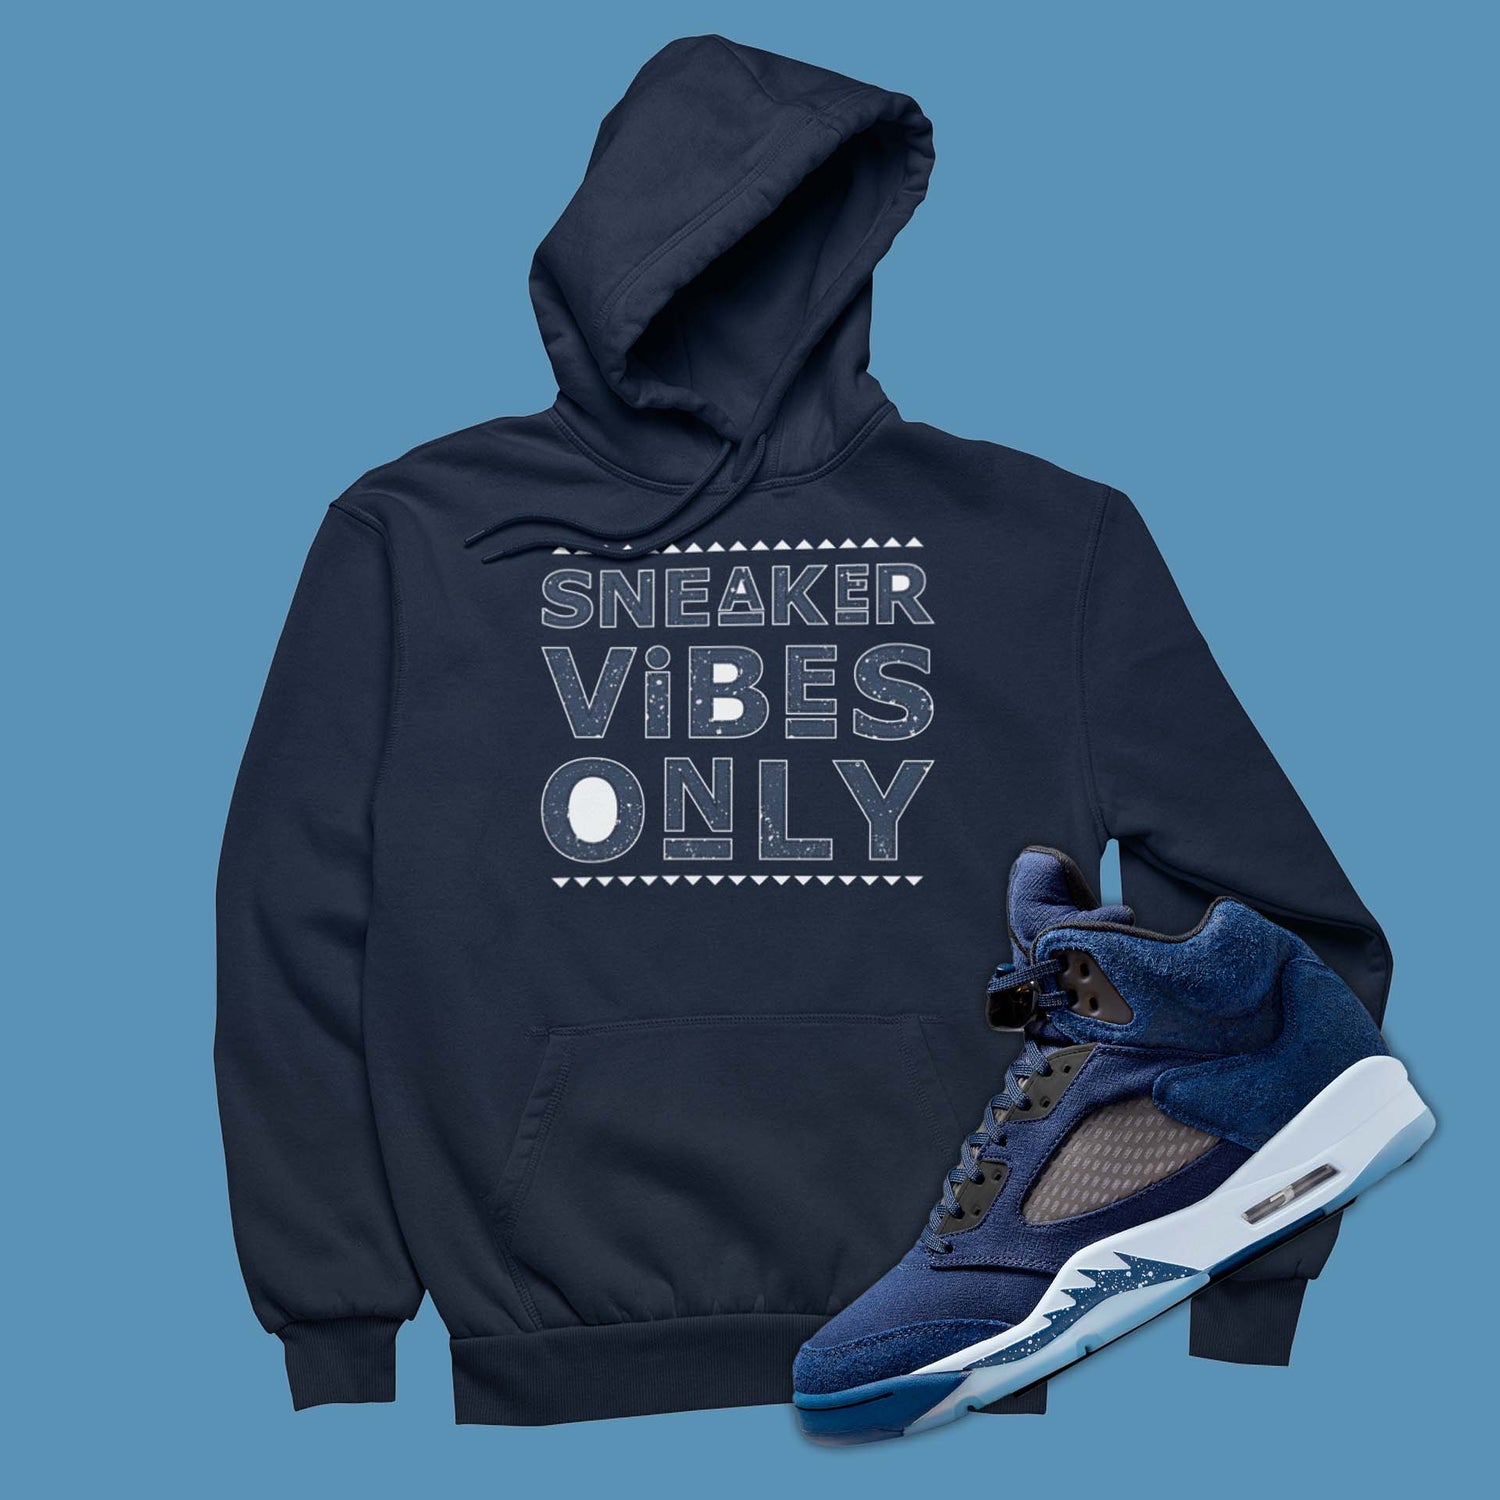 sneaker match hoodie is the perfect sweatshirt to match your Air Jordan 5 Midnight Navy